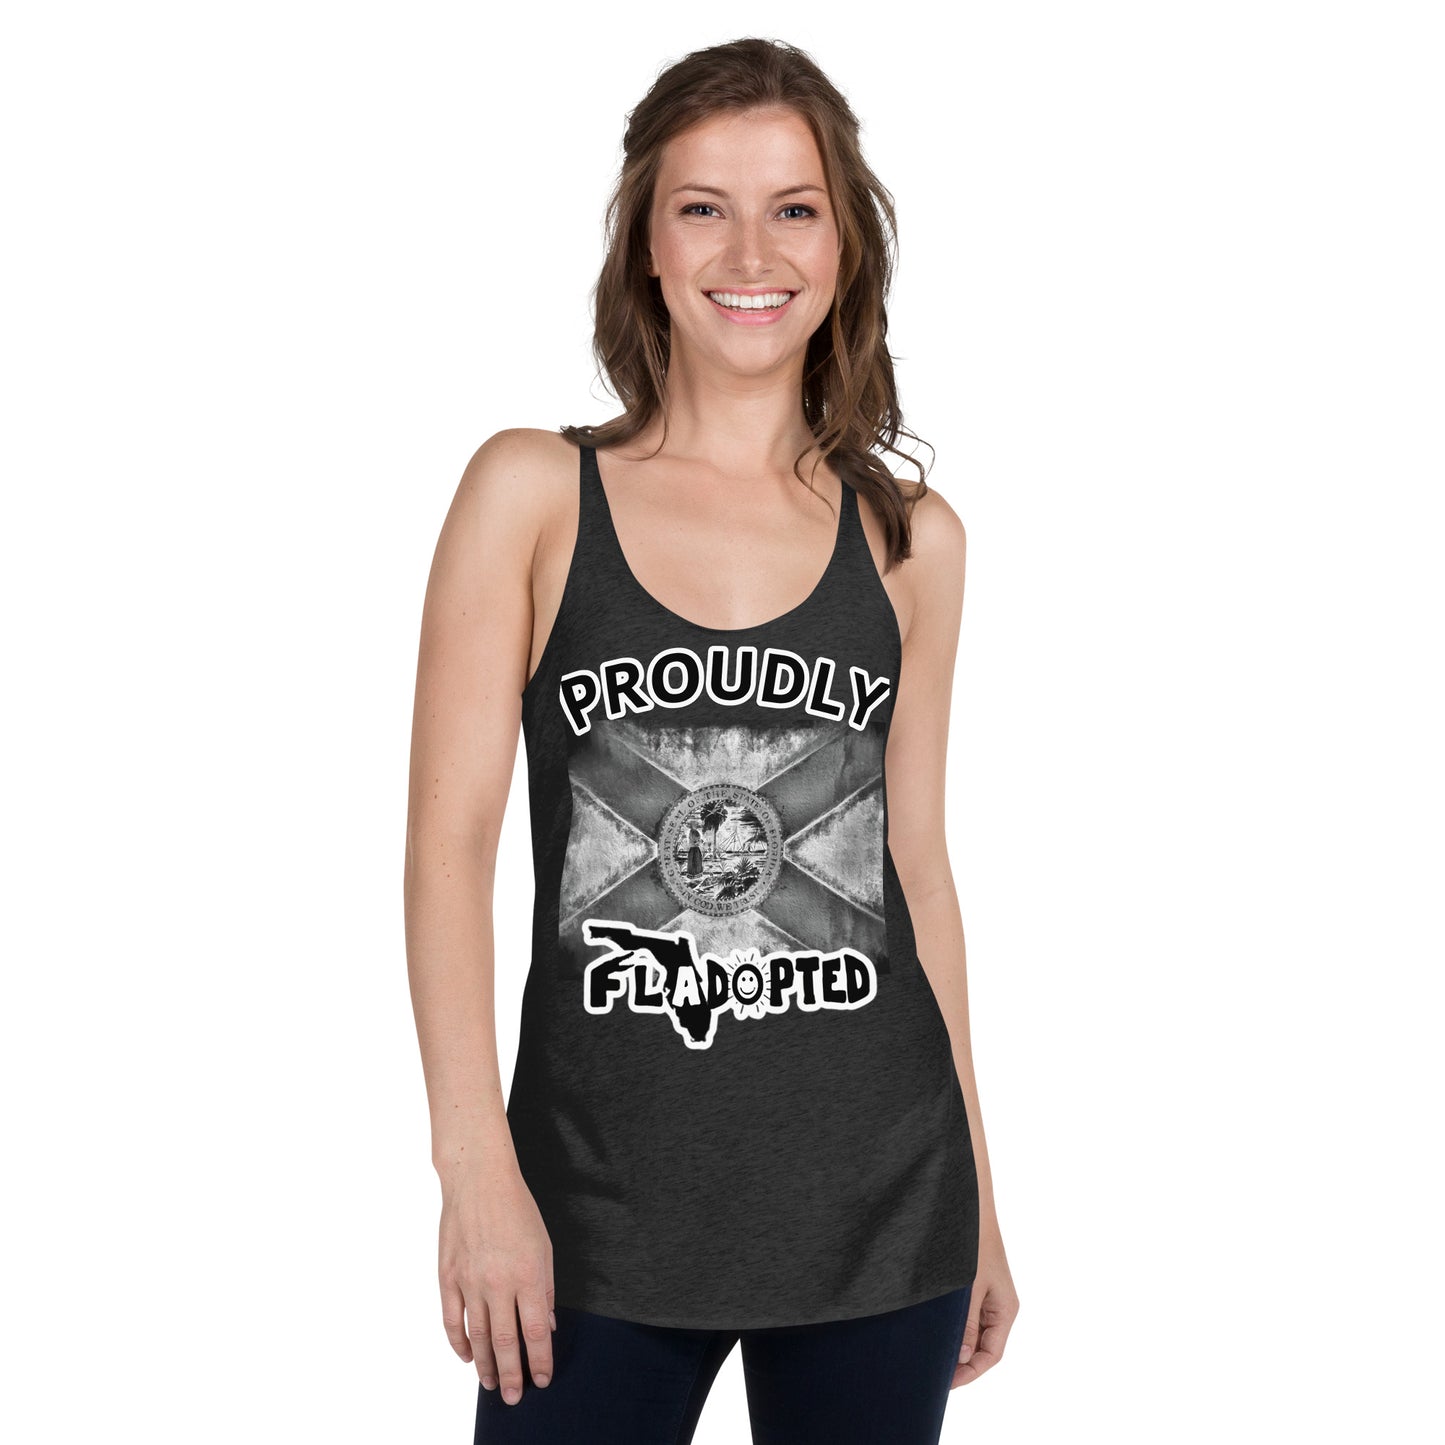 Proudly FLadopted Women's Racerback Tank